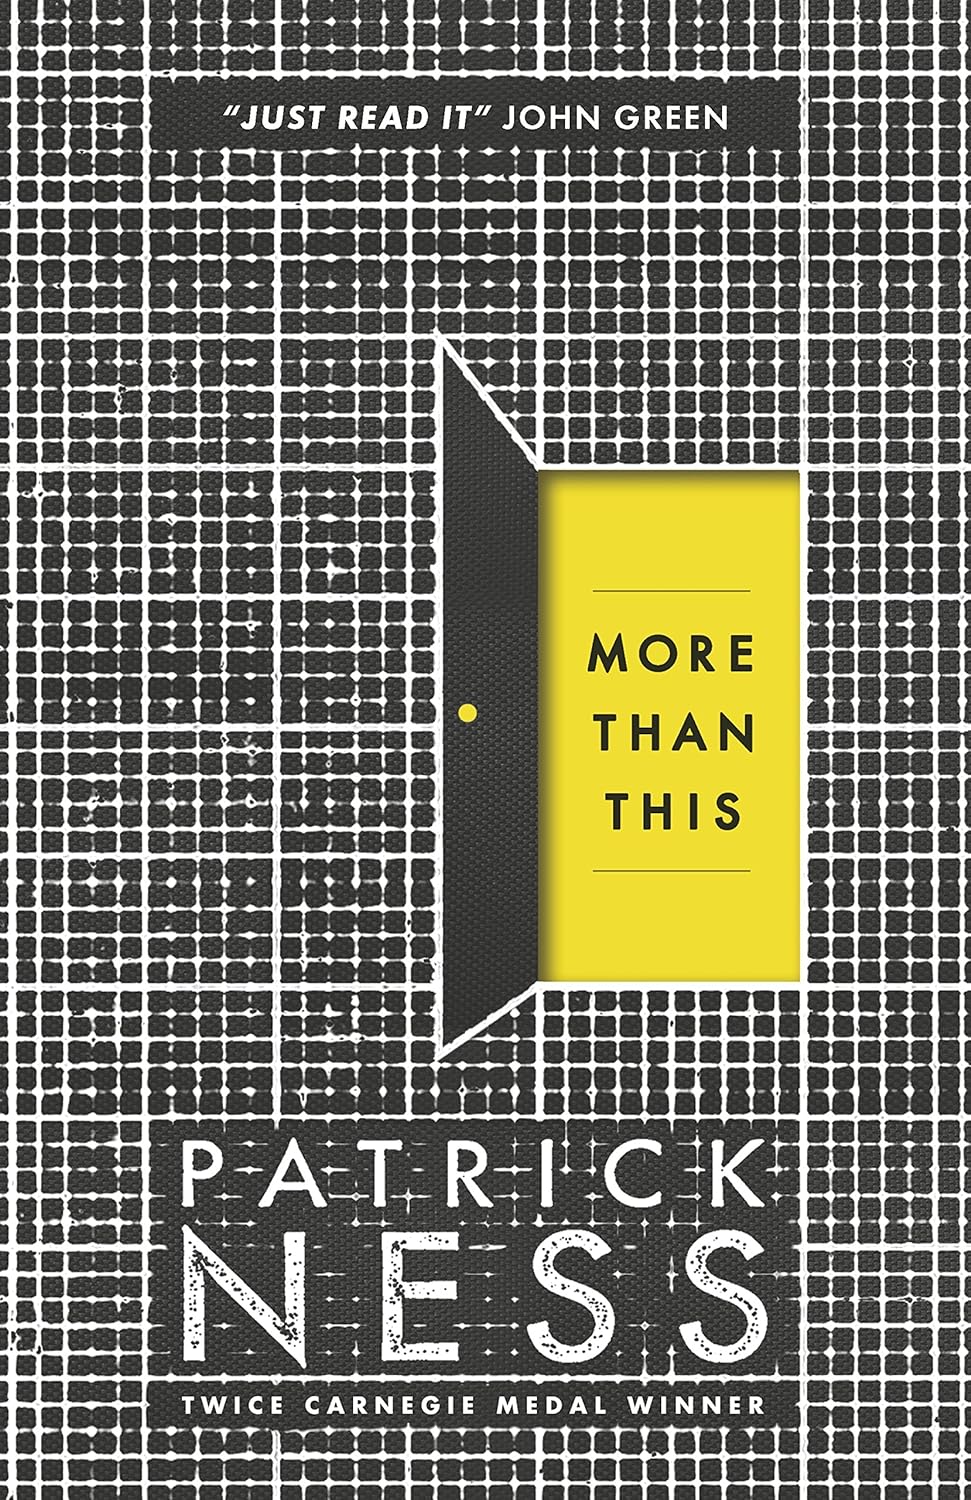 The book cover for More Than This is covered in black and white checkers. Just off centre is an open door, revealing a yellow interior with the title of the novel written in black. The yellow amongst the black and white creates a striking contrast.